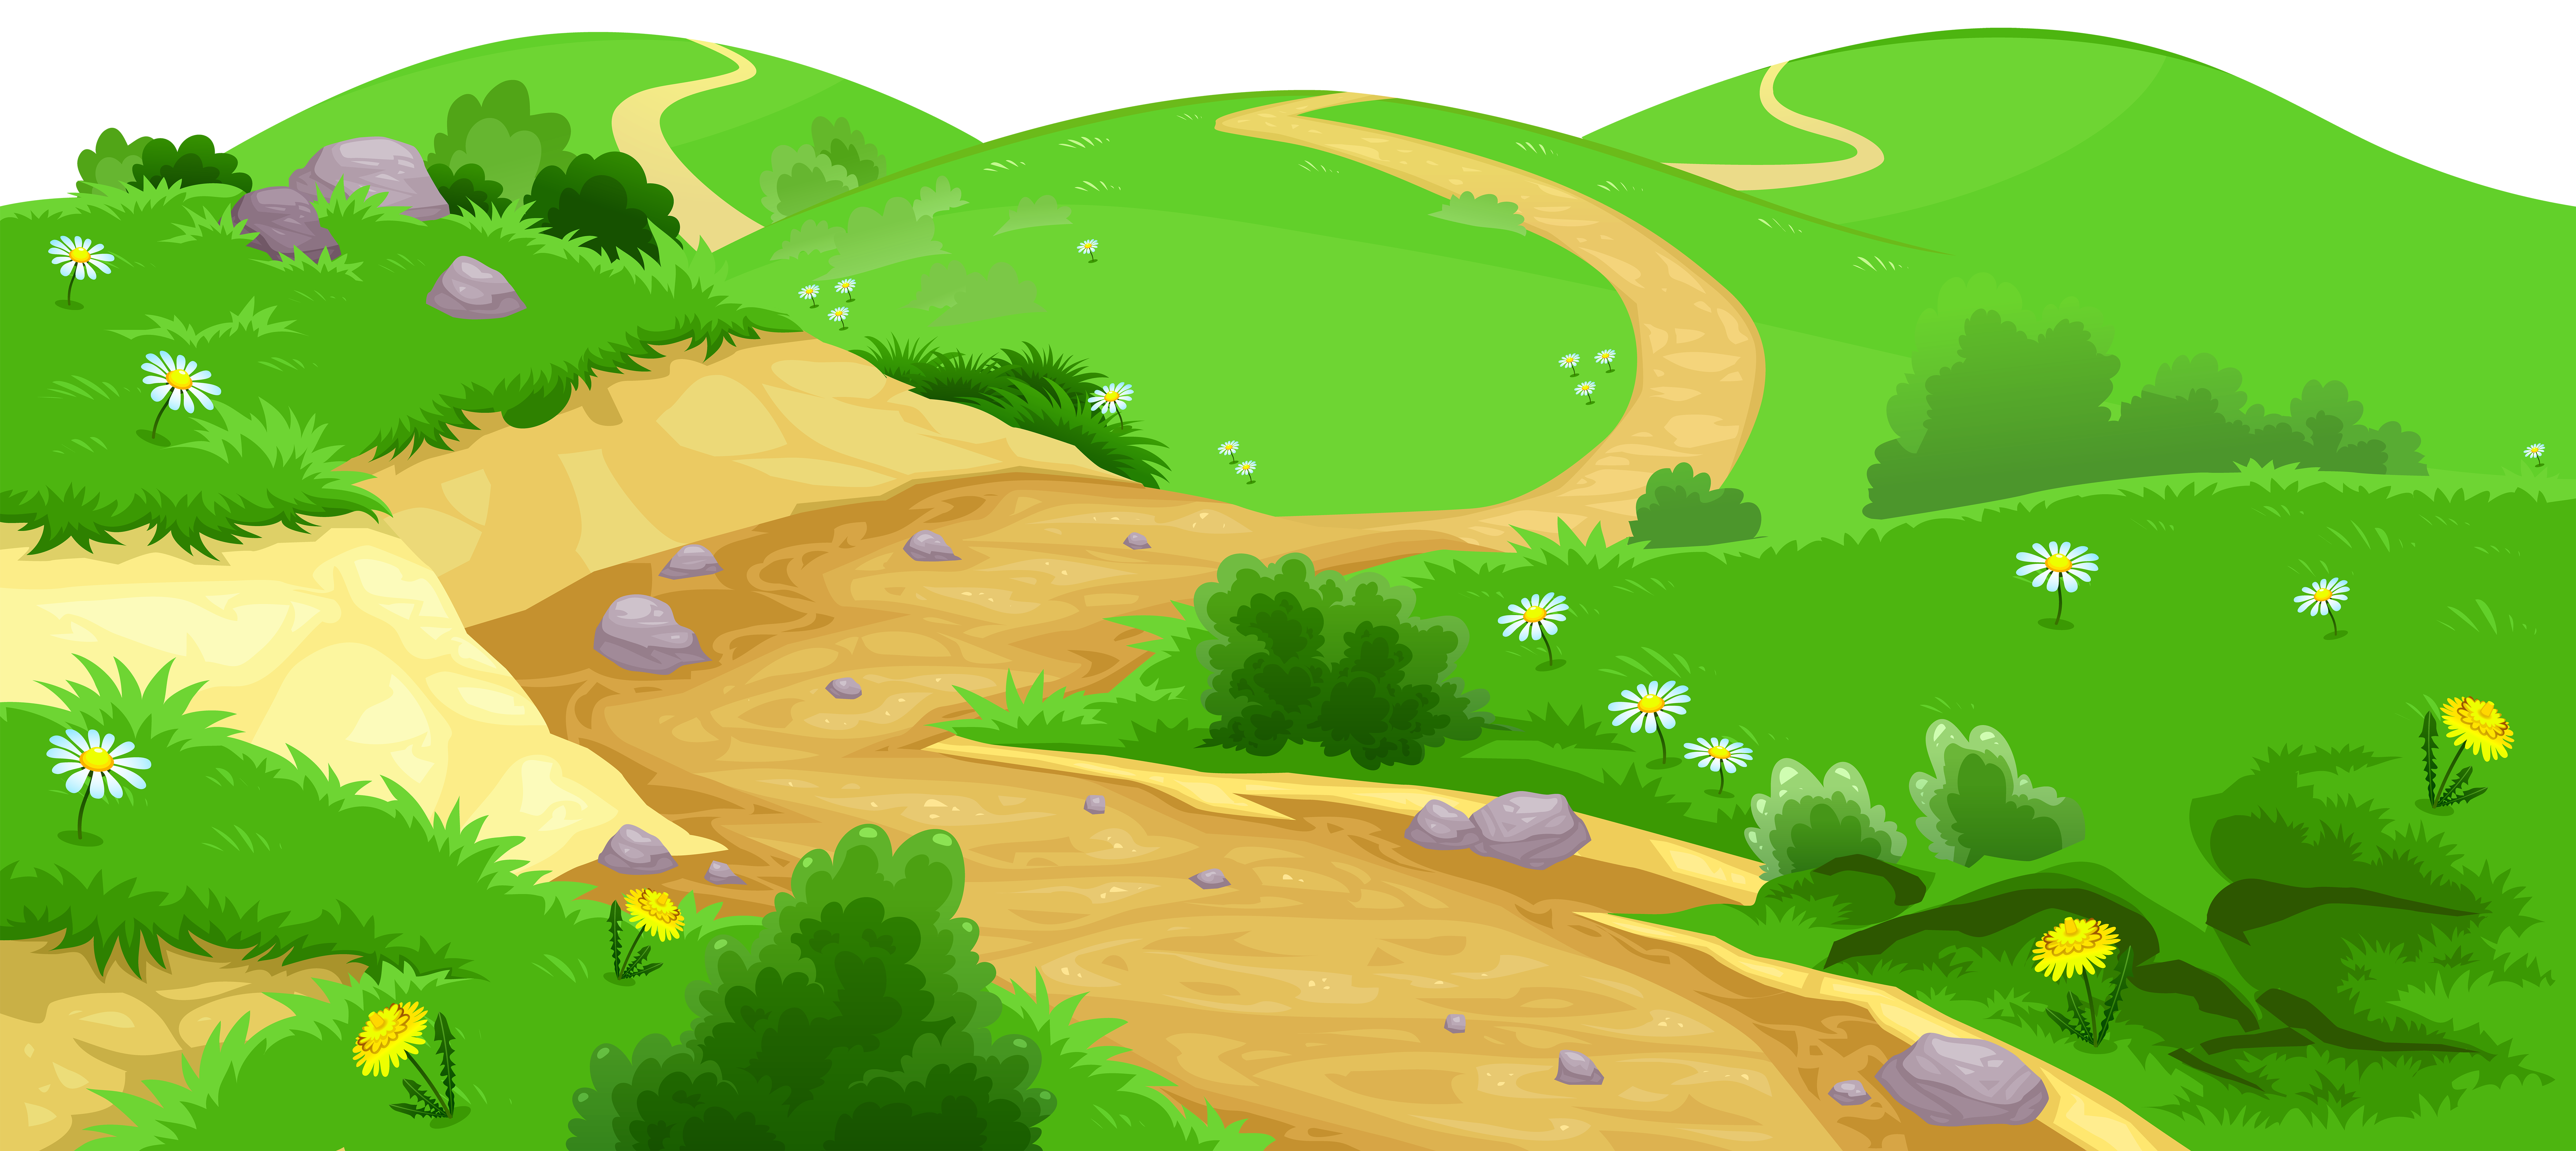 Clipart grass ground. Valley transparent png image